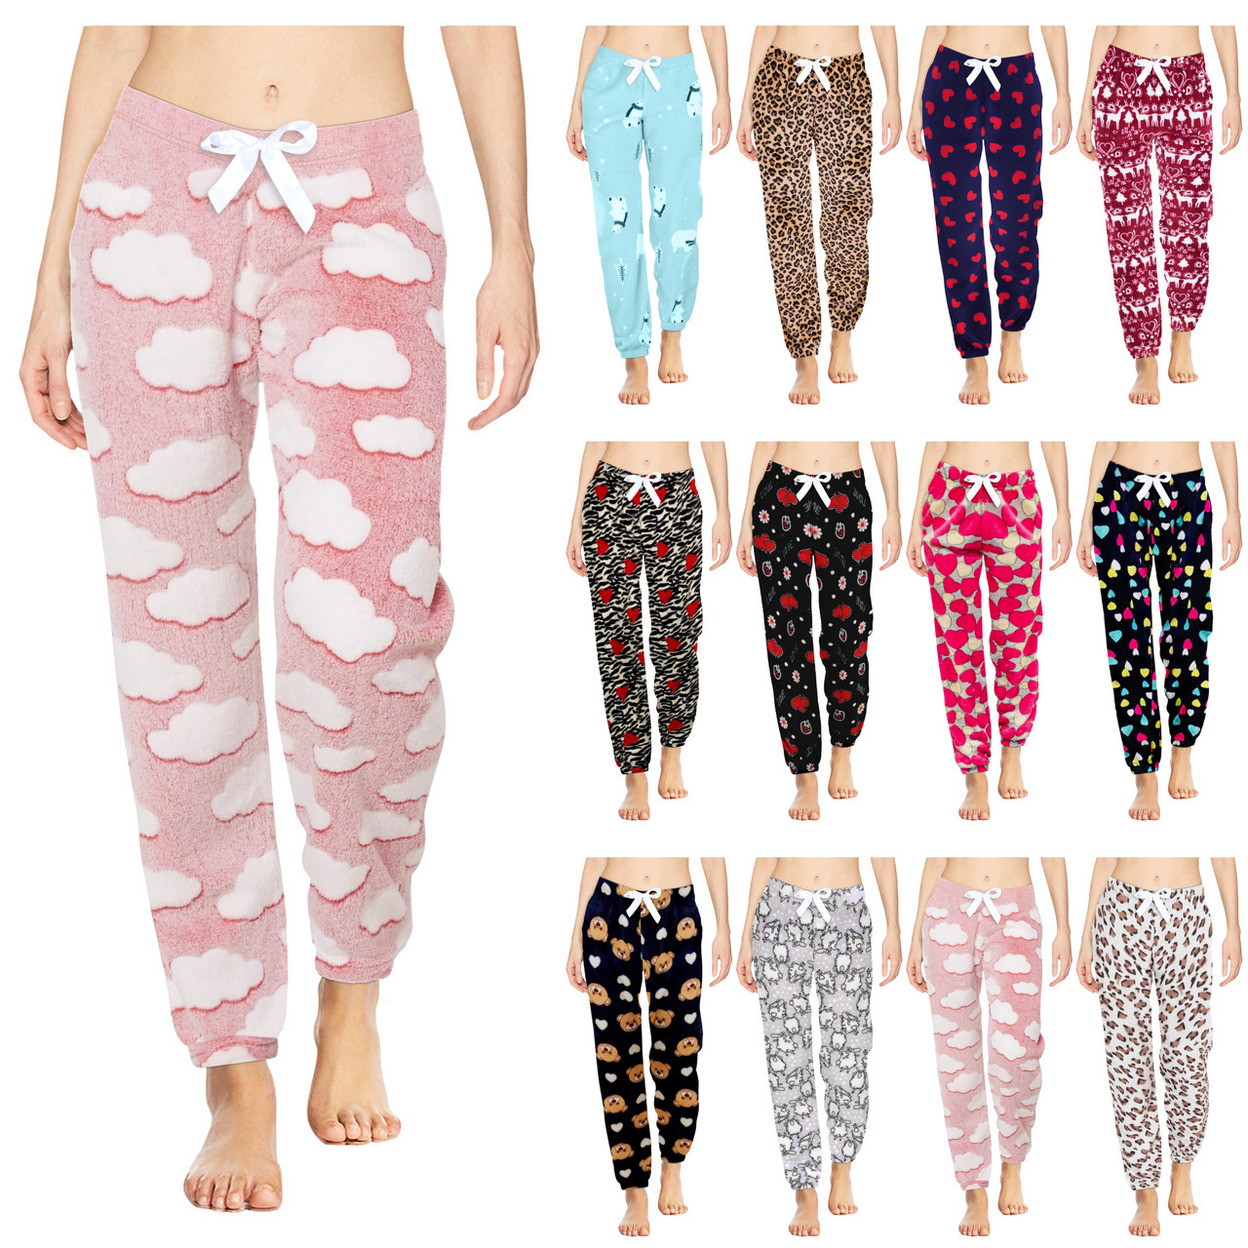 Multi-Pack: Women's Printed Ultra-Soft Comfy Stretch Micro-Fleece Pajama Lounge Pants - 3-pack, Shapes, Small